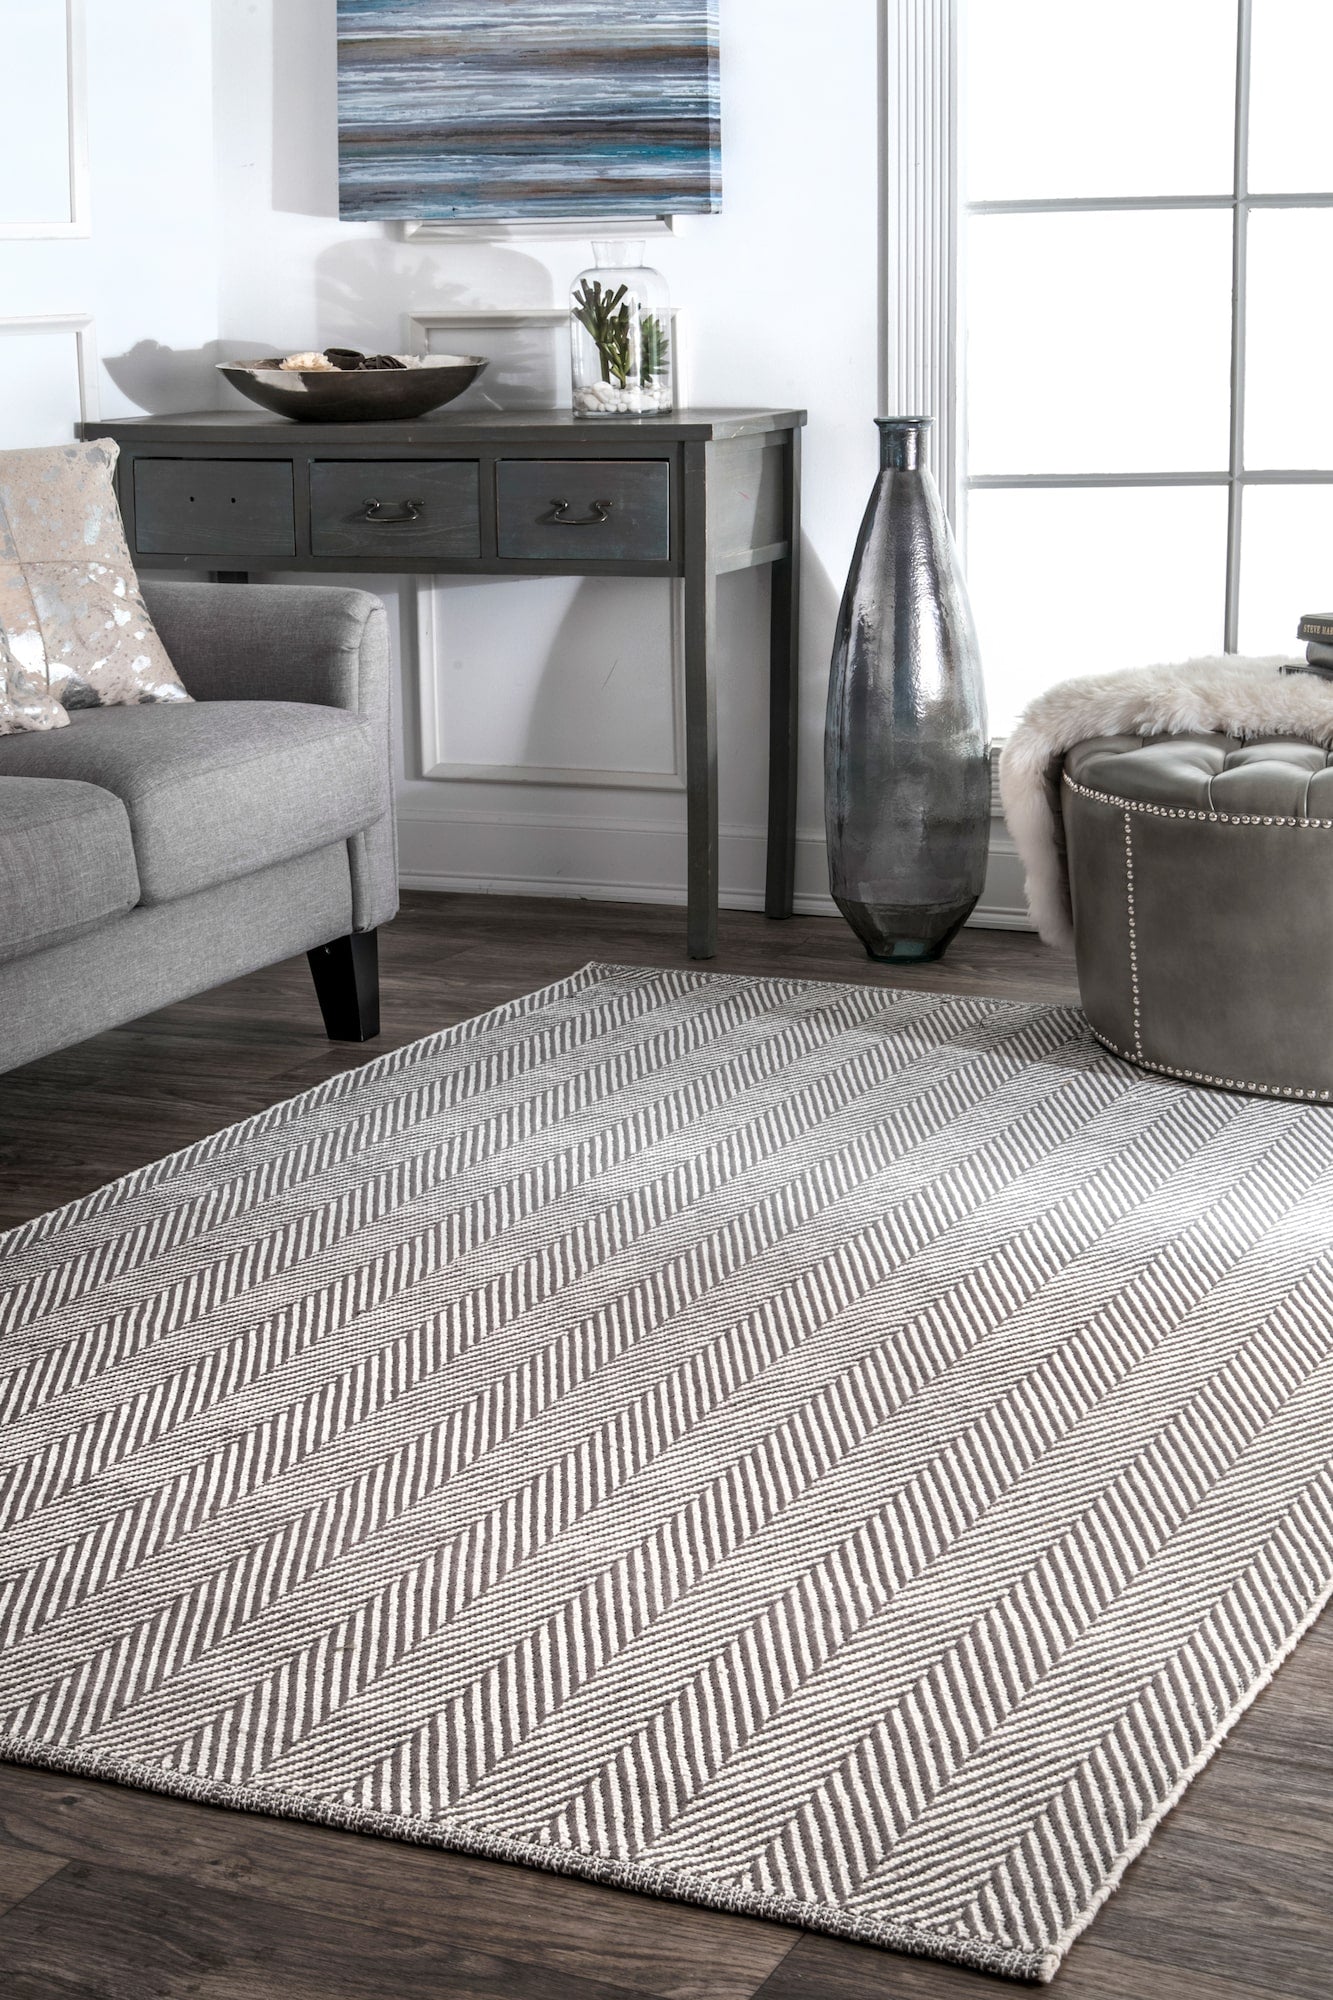 How to Choose the Best Home Office Rug